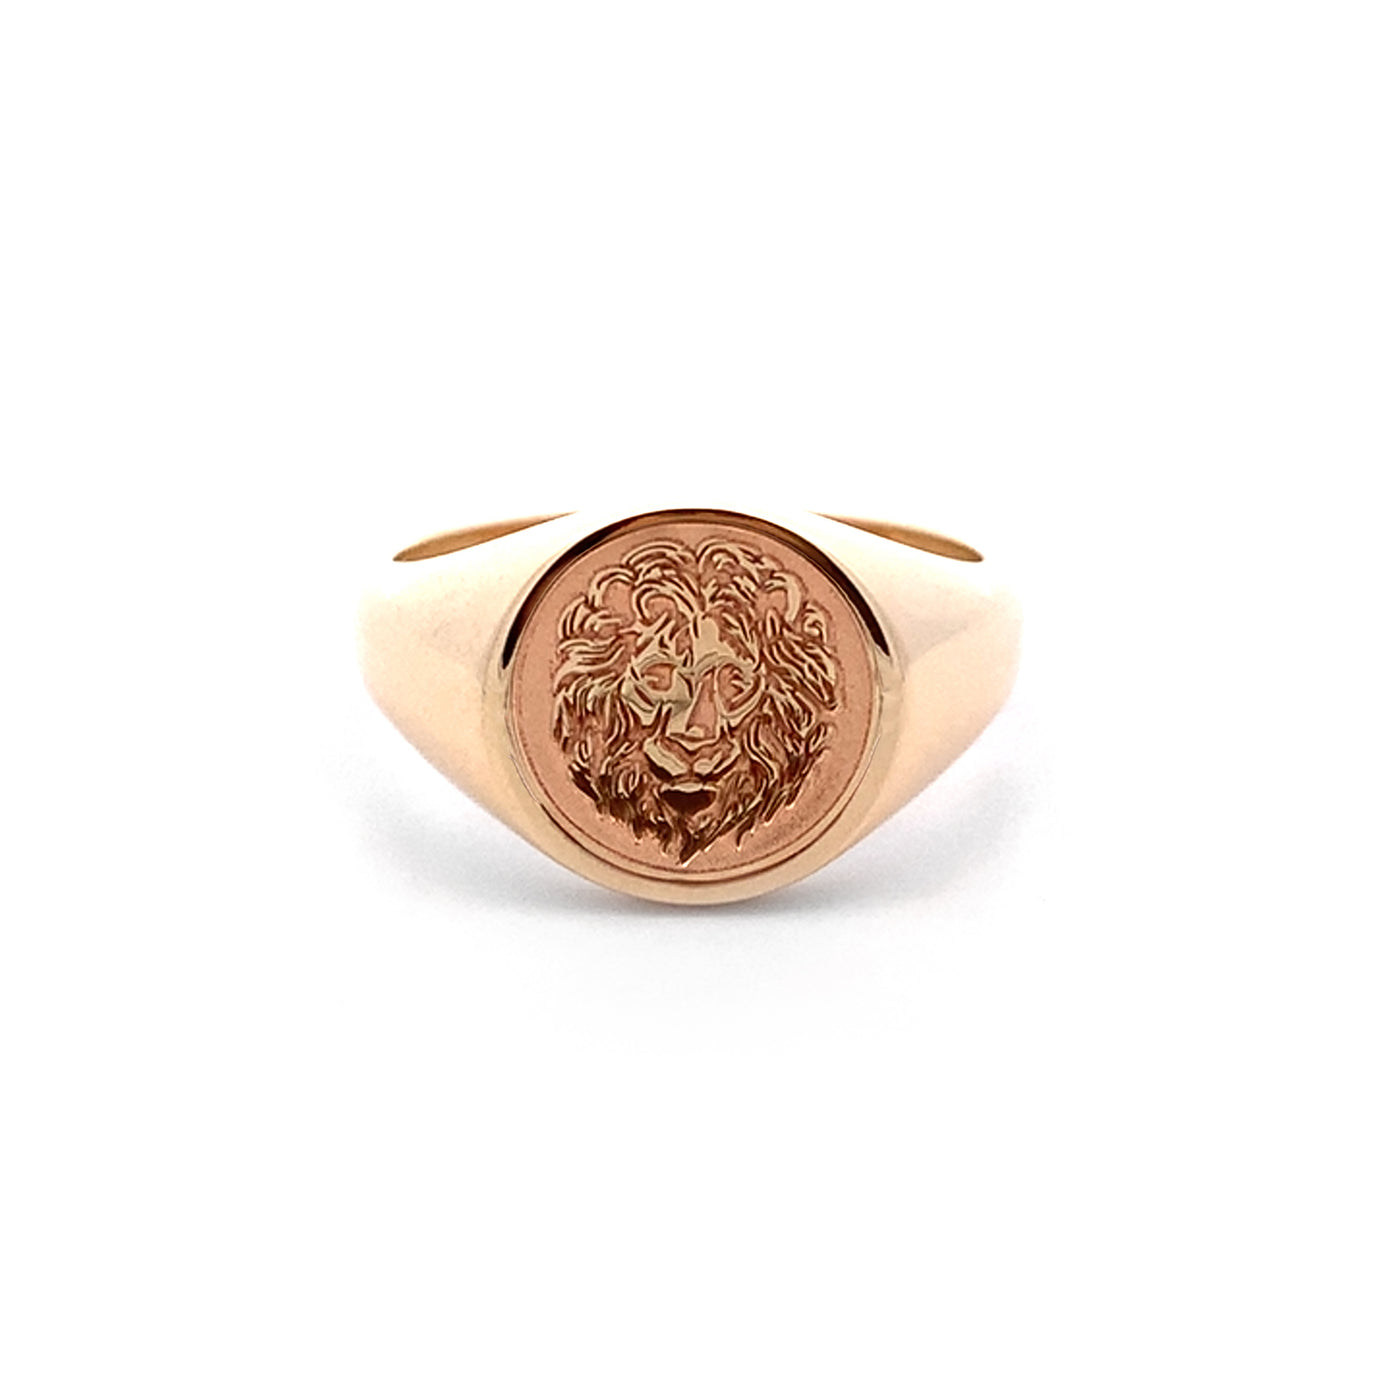 Lion Engraved Signet Ring in Yellow Gold